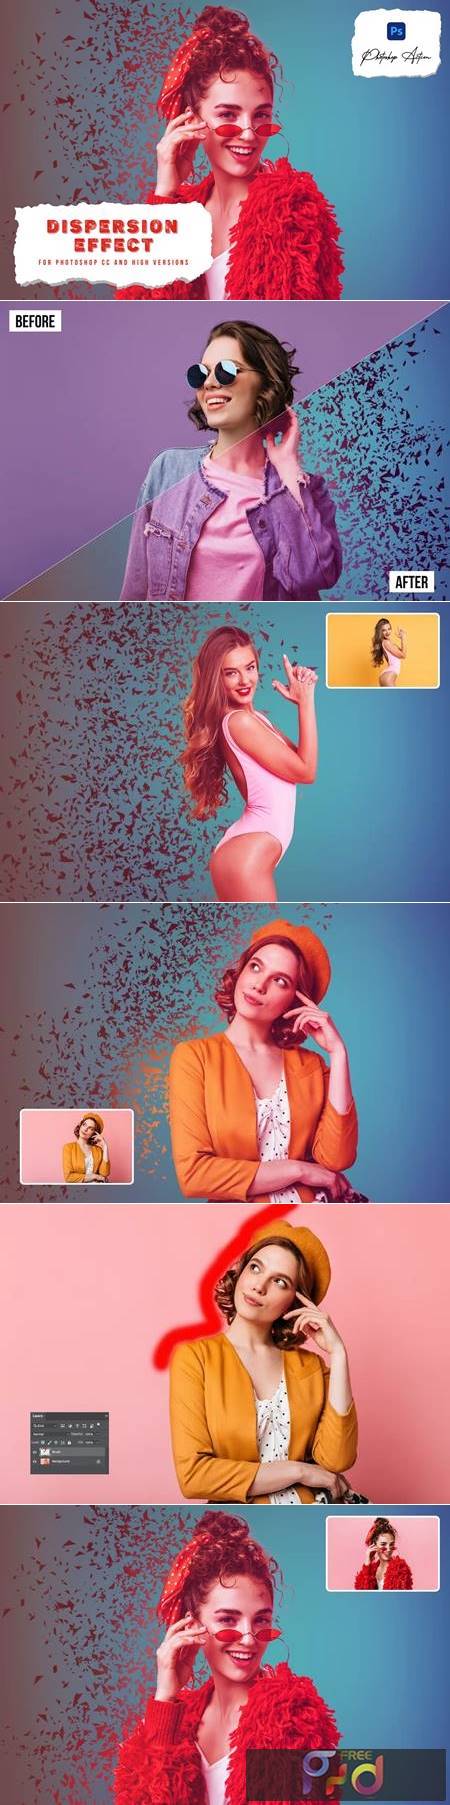 Dispersion Effect Photoshop Action F4FPQFD 1